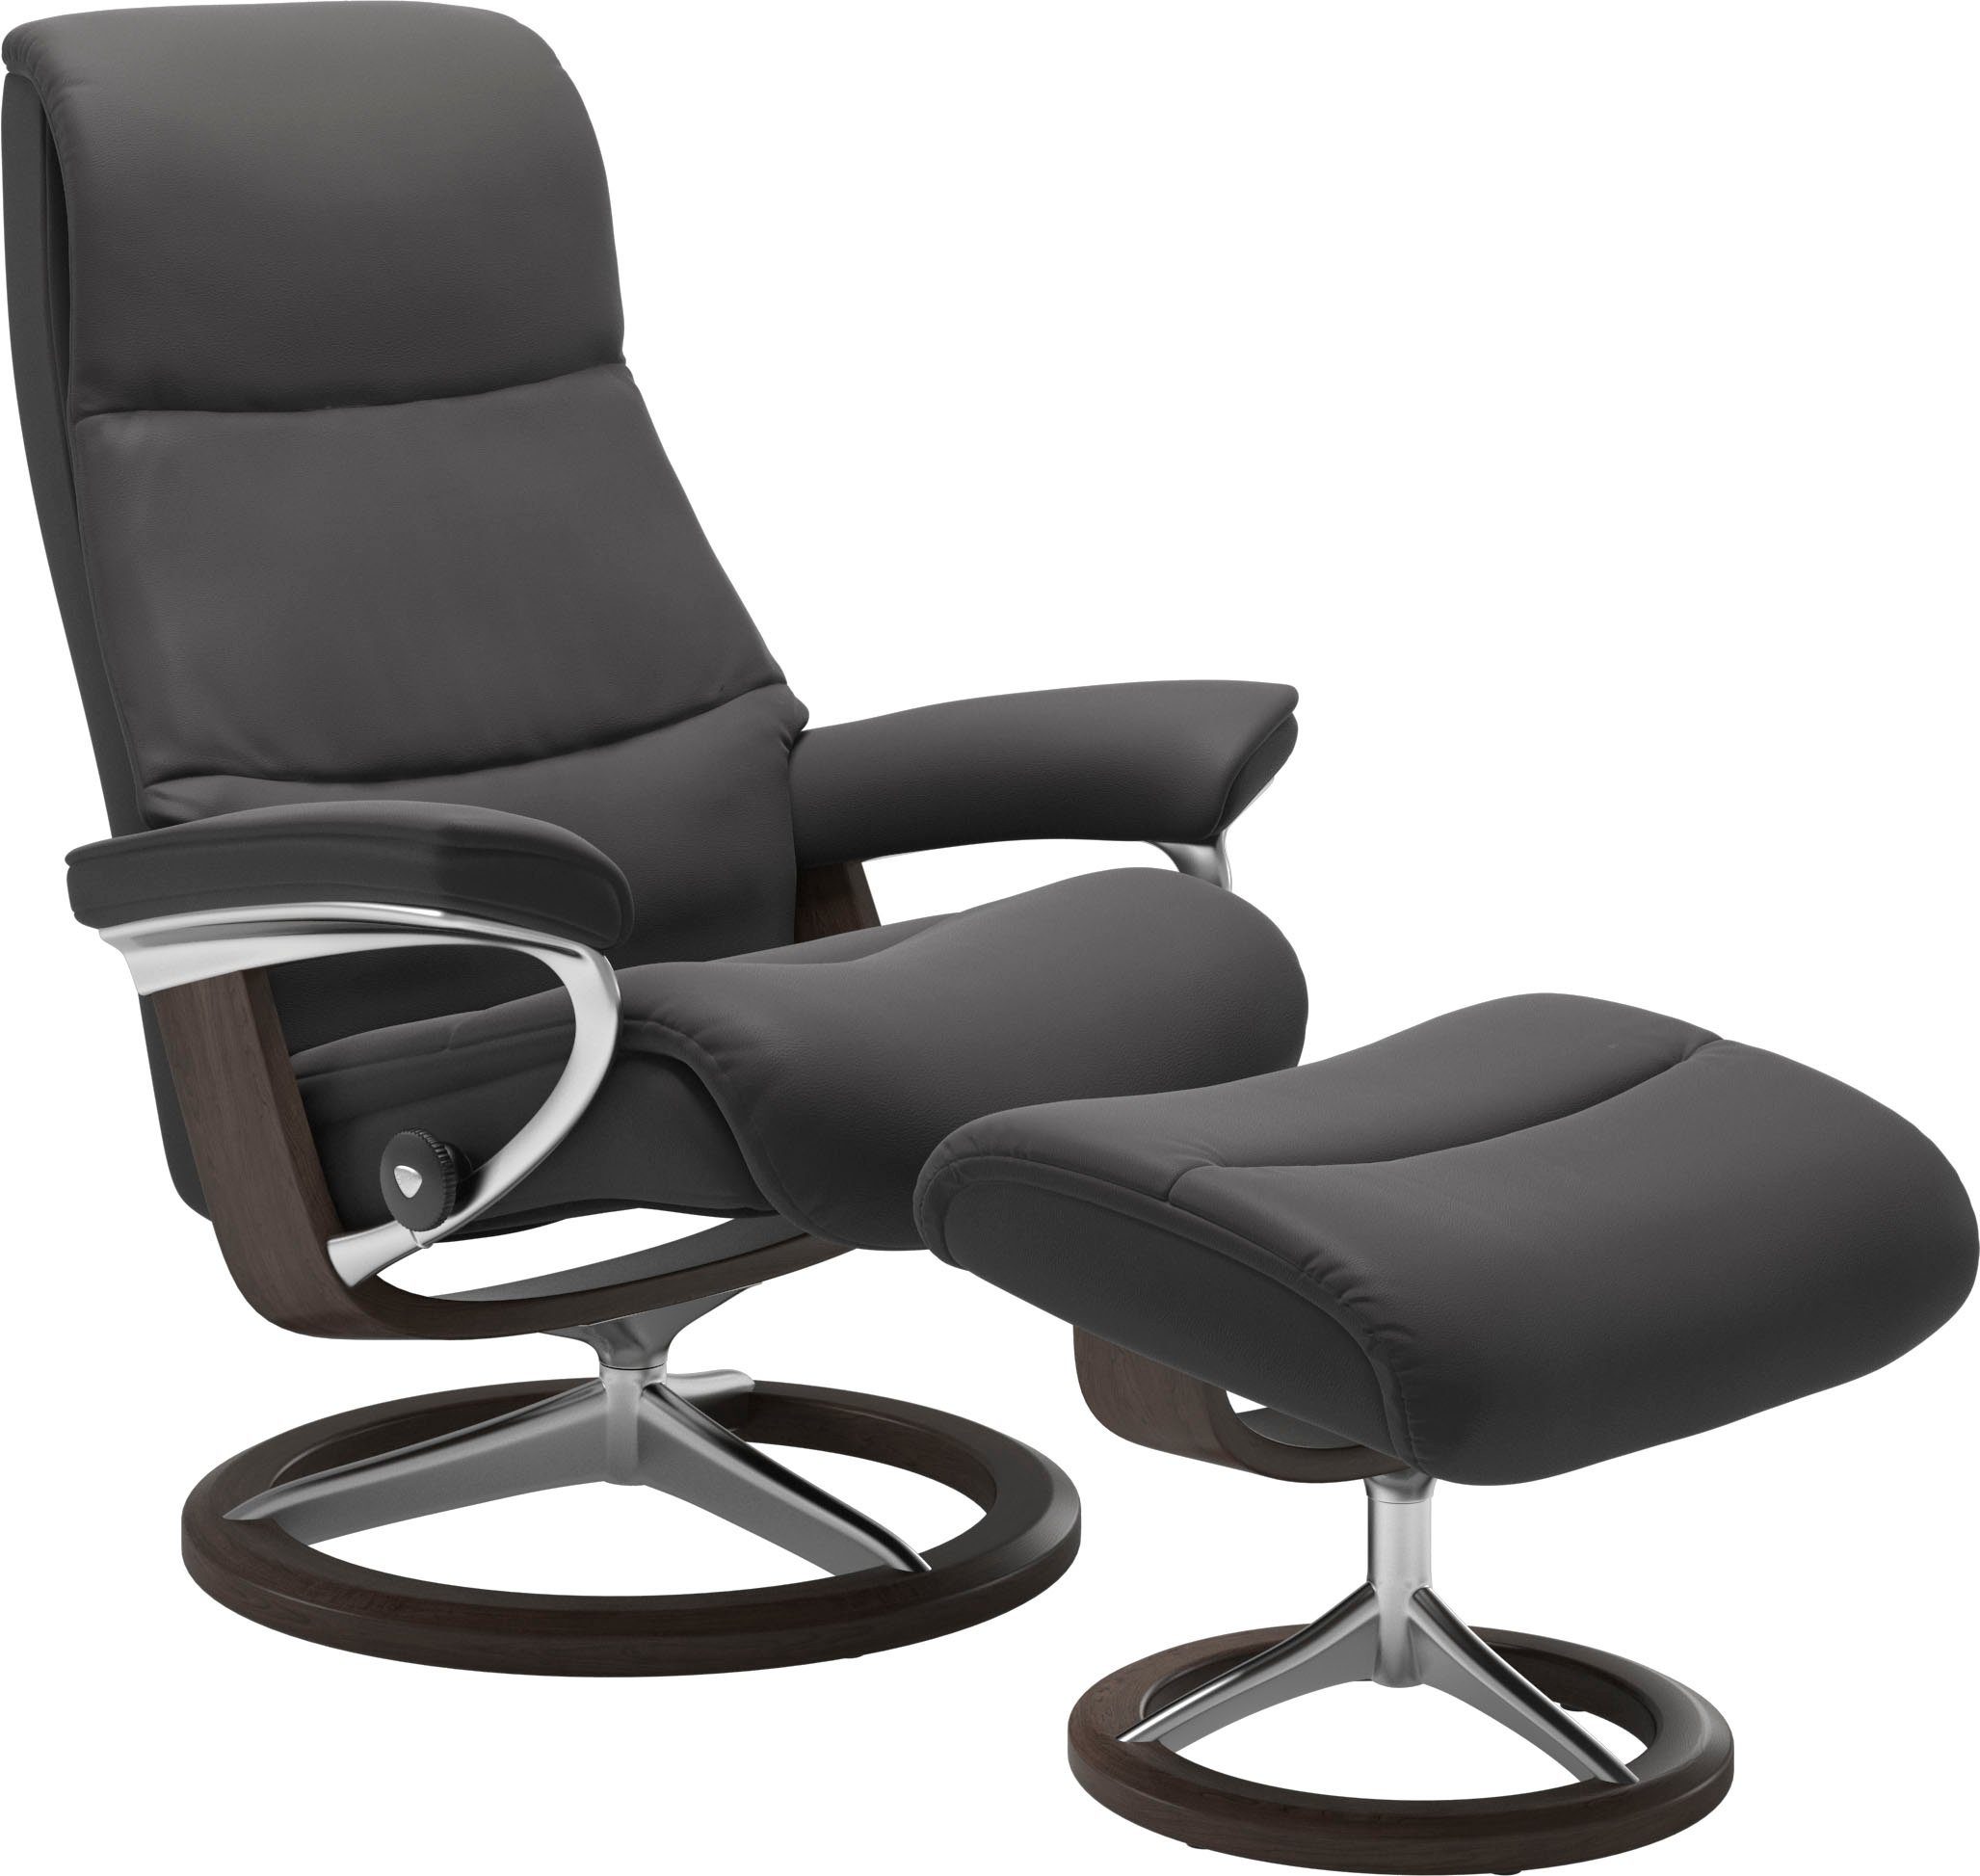 View, Base, Relaxsessel S,Gestell Stressless® Signature mit Wenge Größe